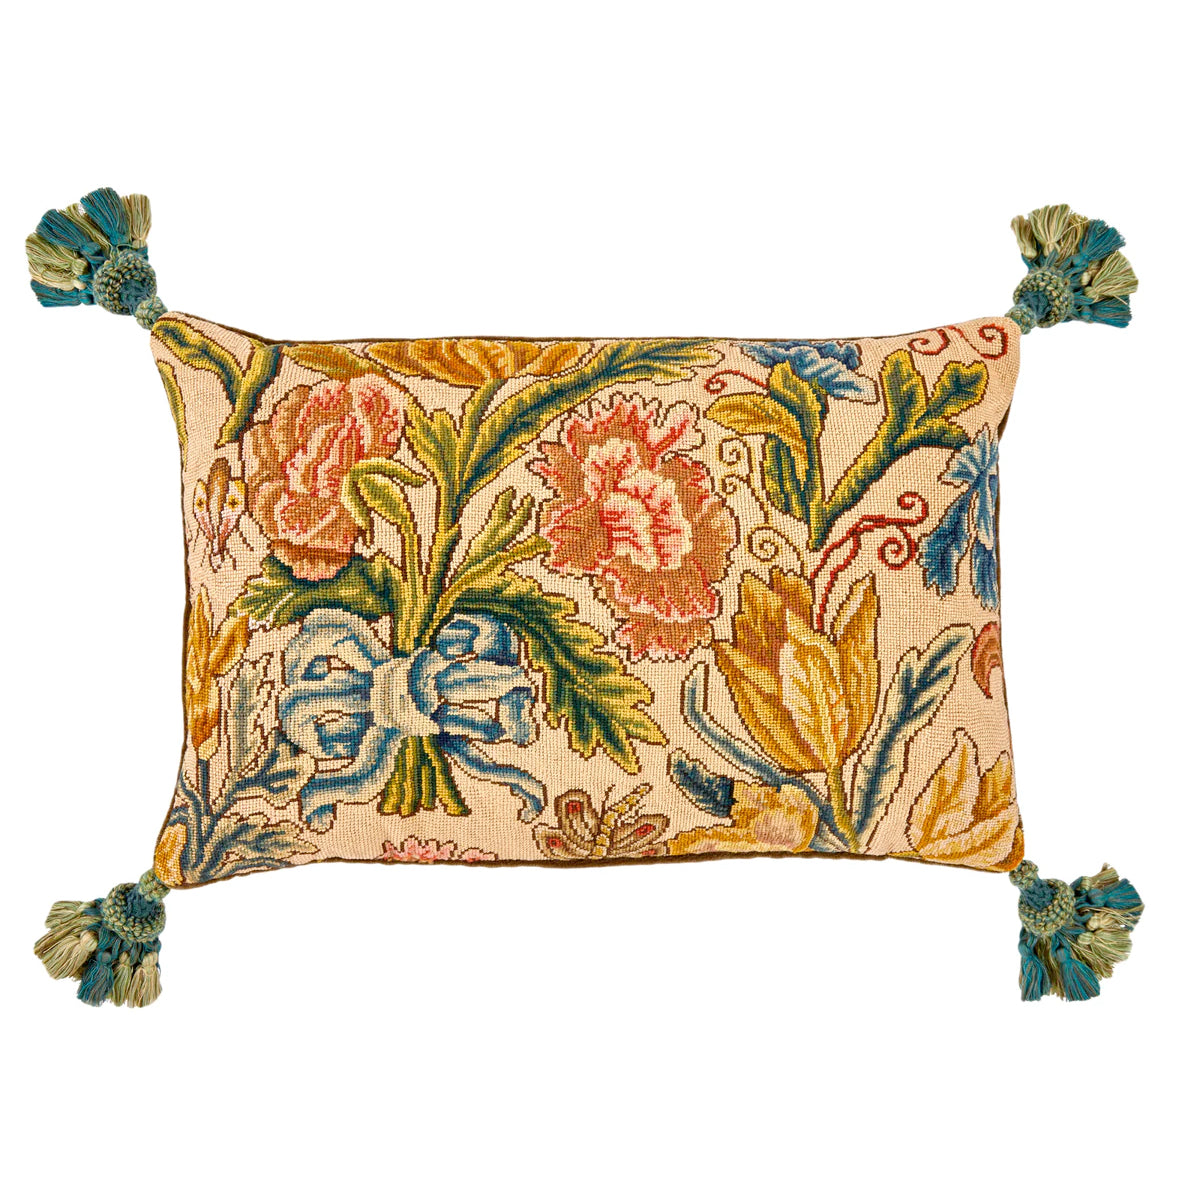 A Pair of 18th Century English Needlework Oblong Cushions